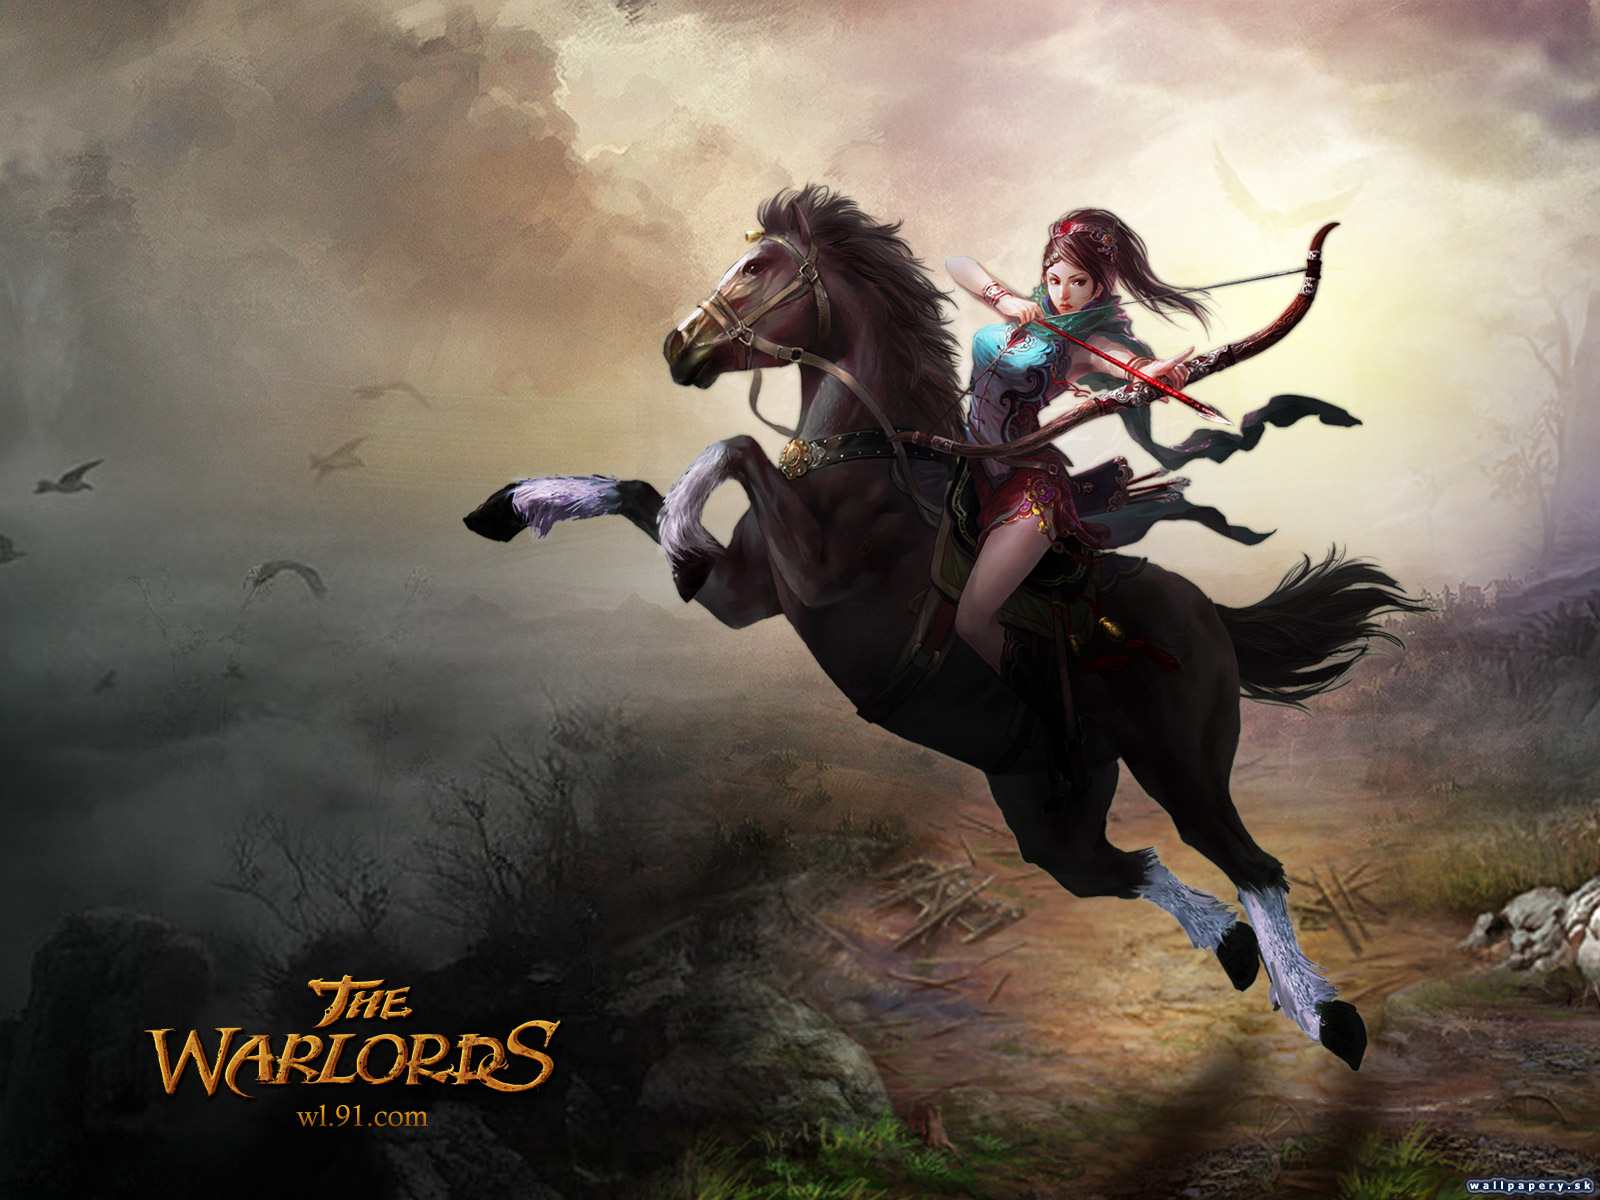 The Warlords - wallpaper 20